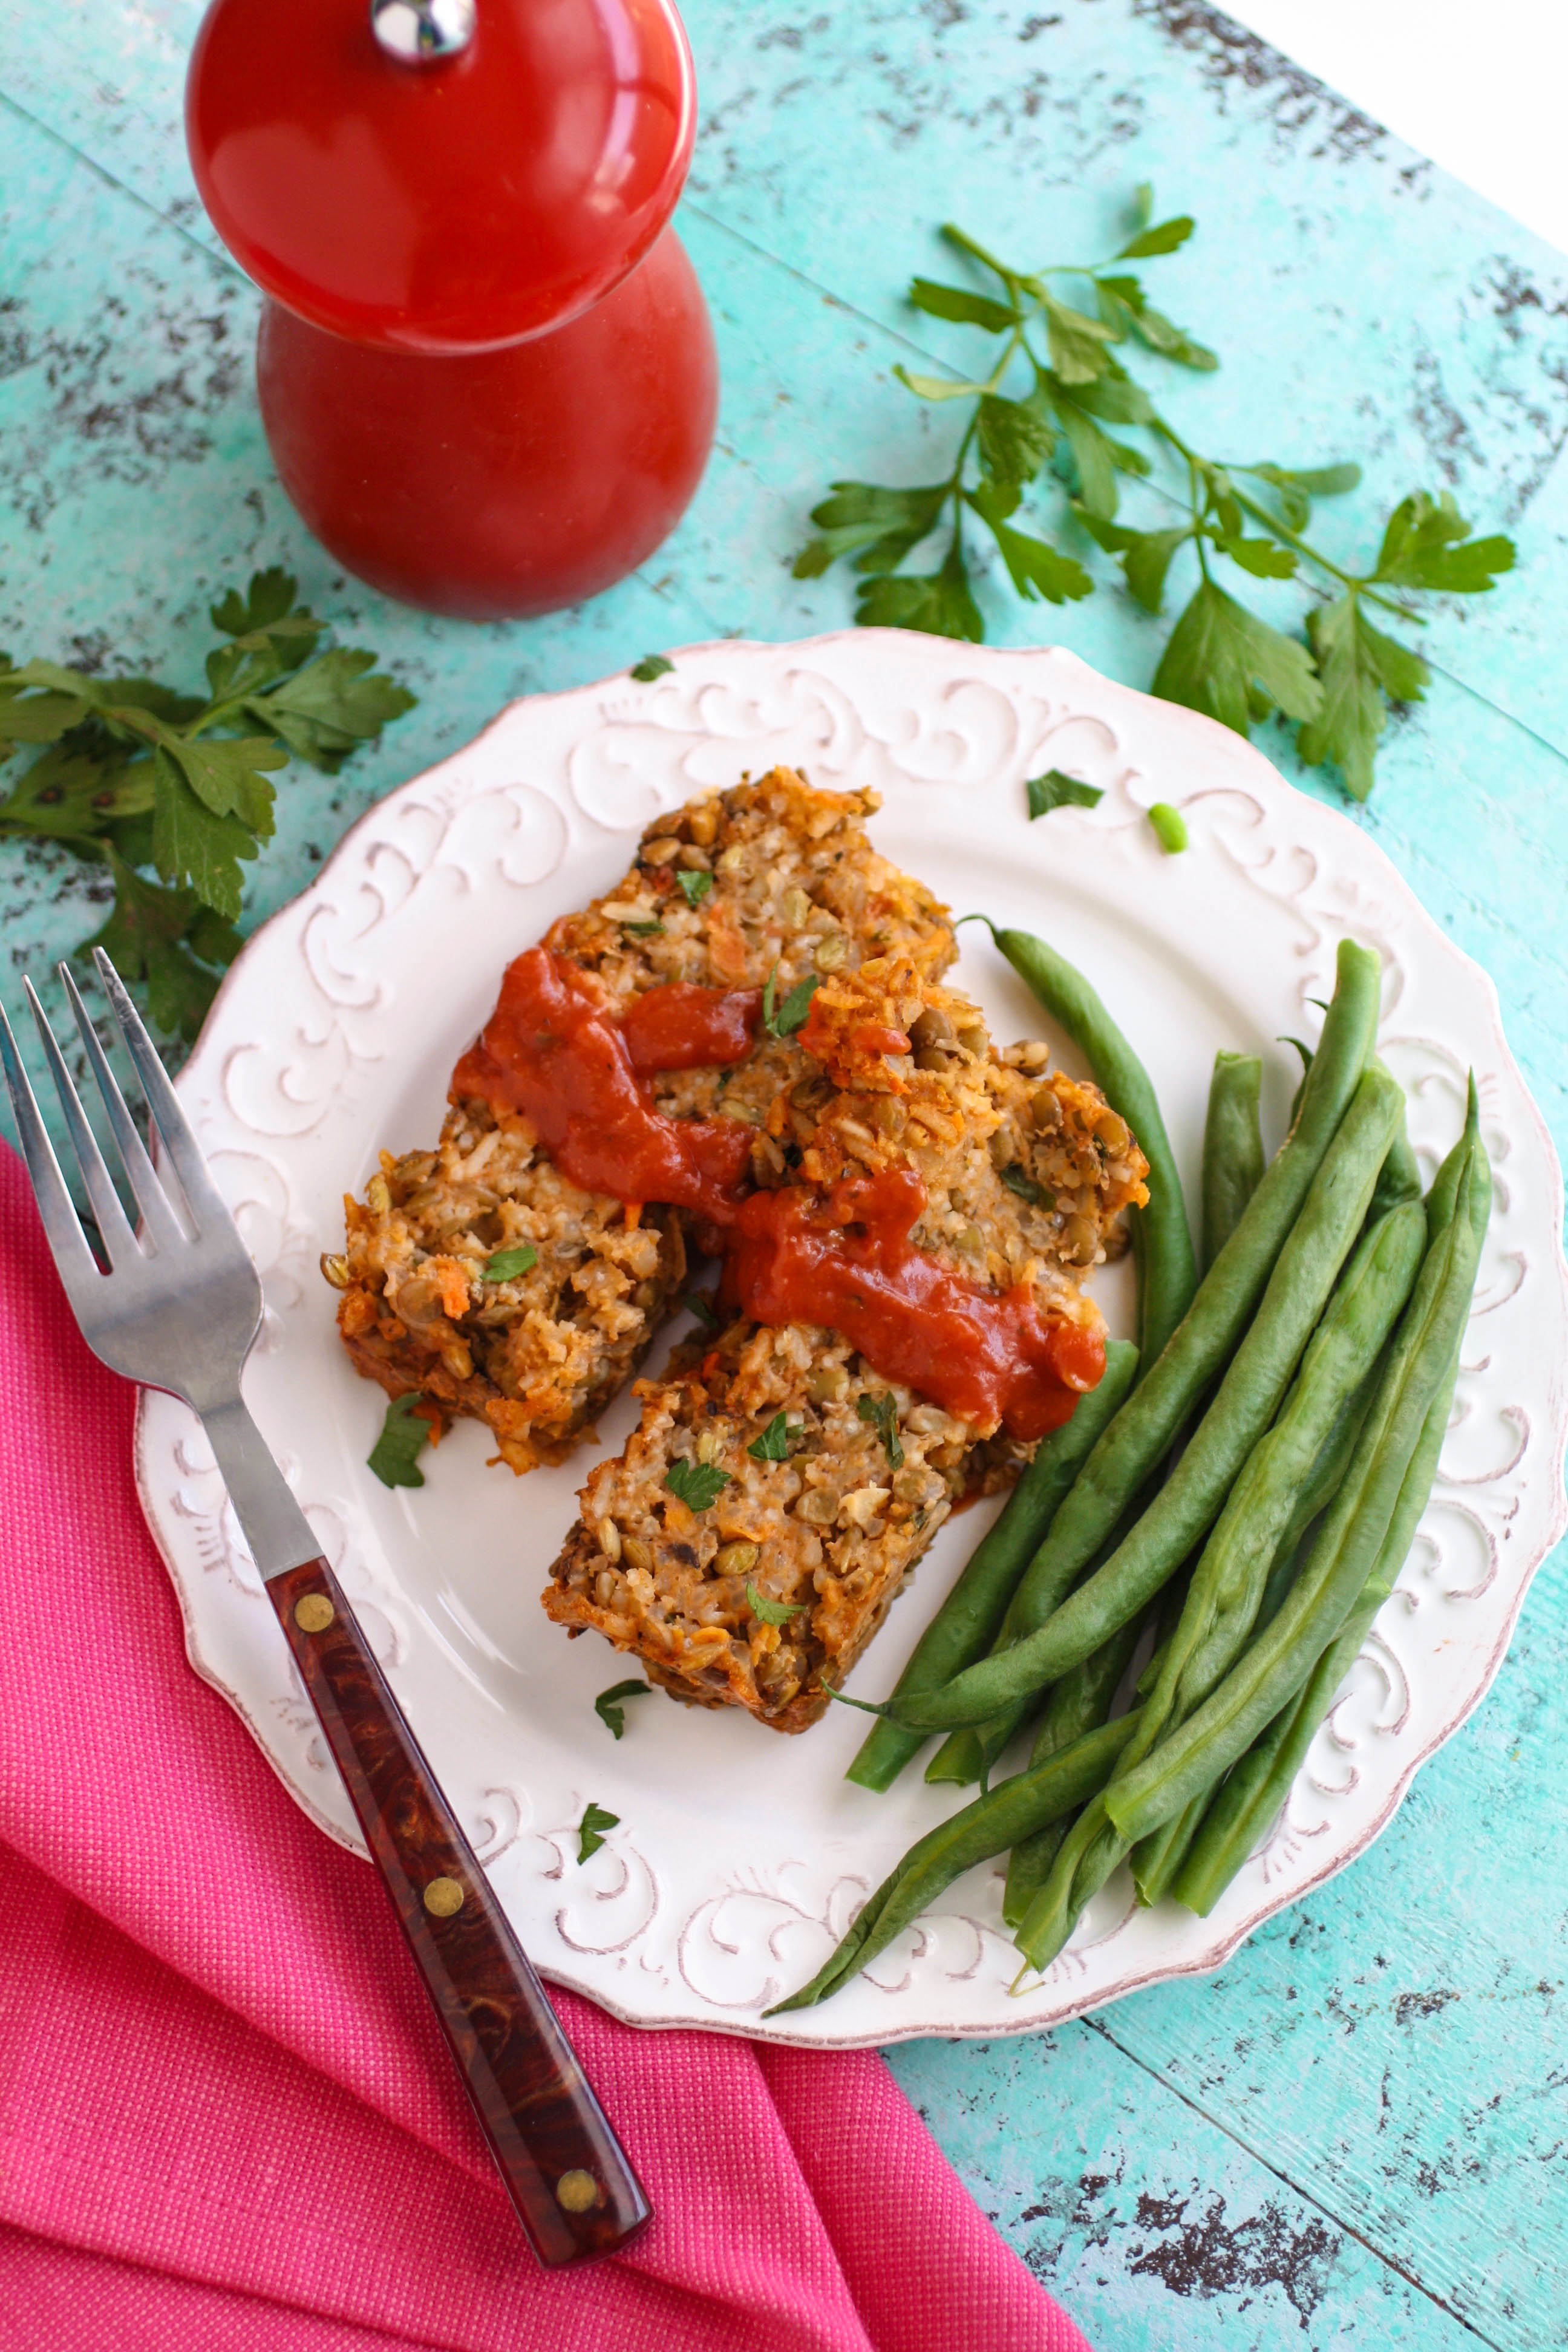 Rice and Lentil Loaf is a wonderful meatless dish everyone will love. This is comfort food that tastes amazing.